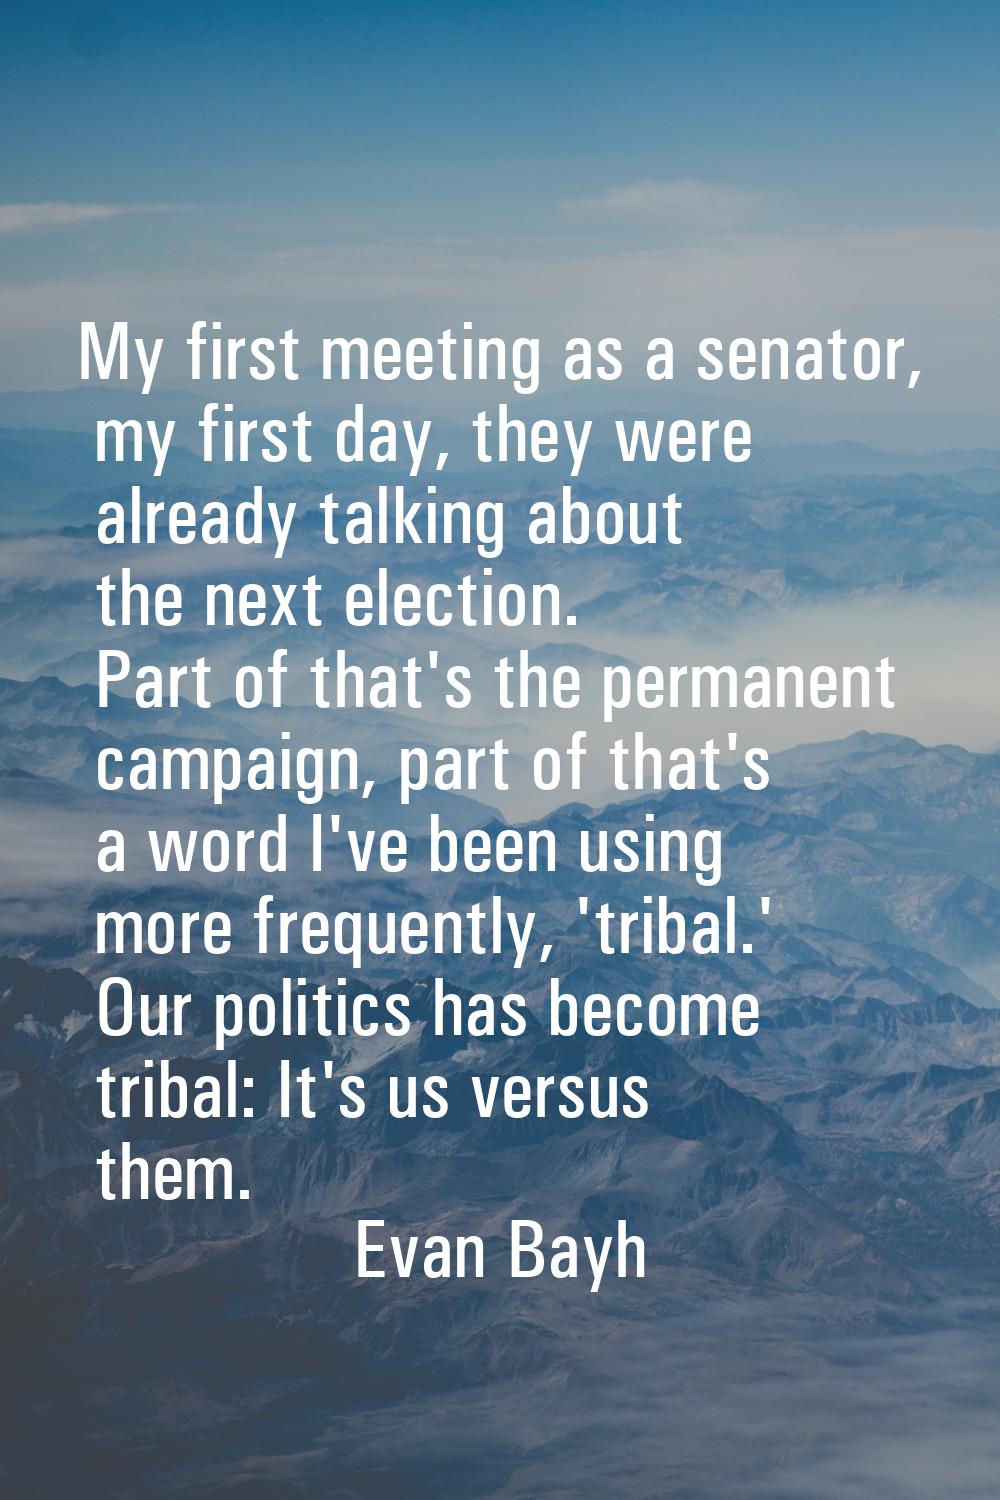 My first meeting as a senator, my first day, they were already talking about the next election. Par